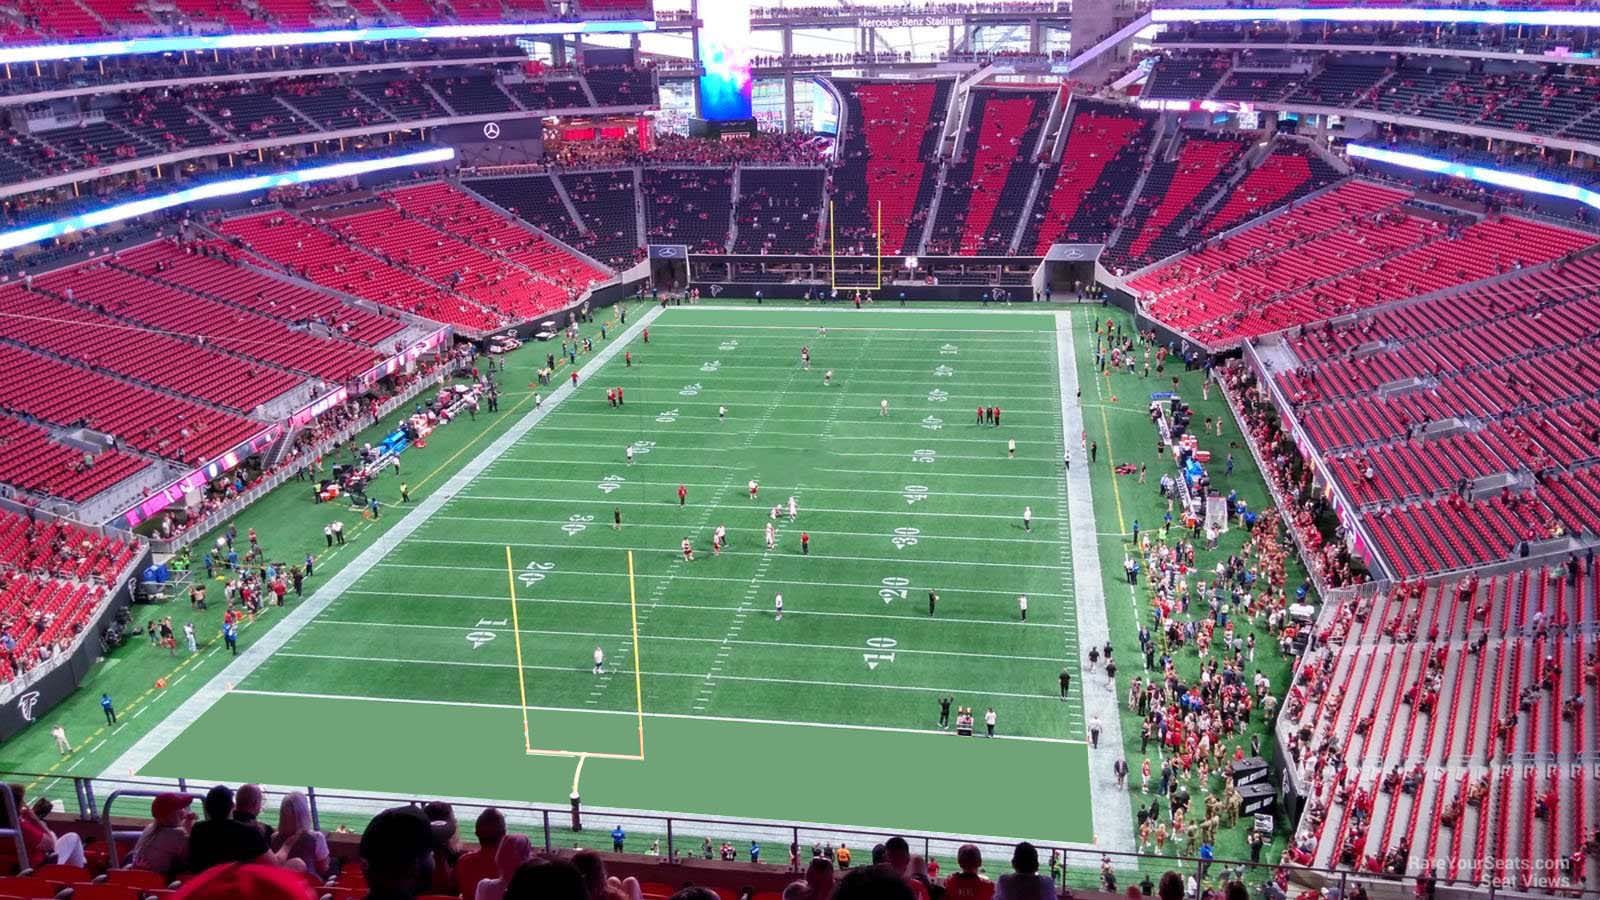 section 324, row 12 seat view  for football - mercedes-benz stadium